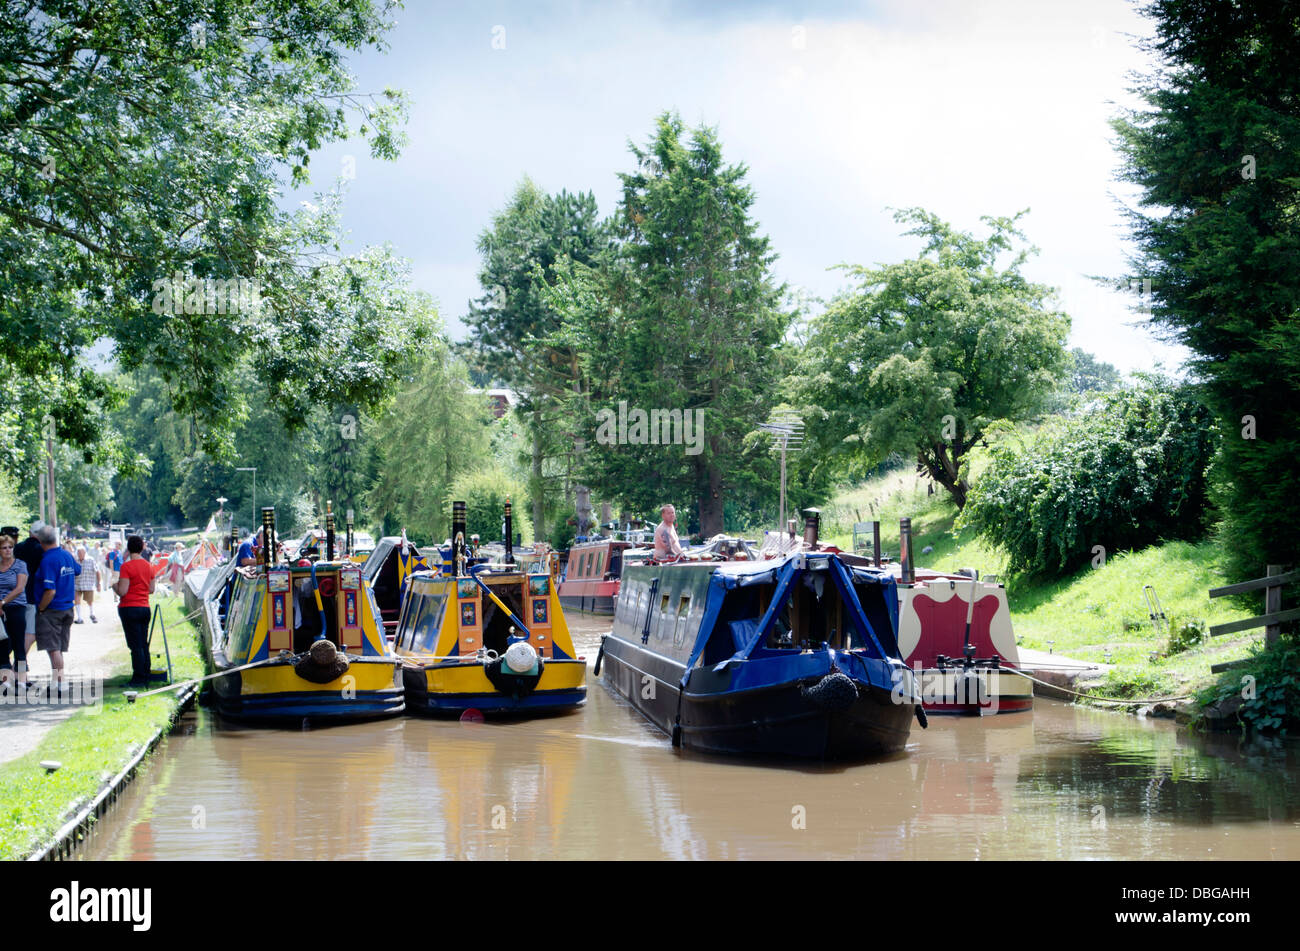 A gathering of canal boats on the Shropshire Union canal near Audlem, NW UK Stock Photo